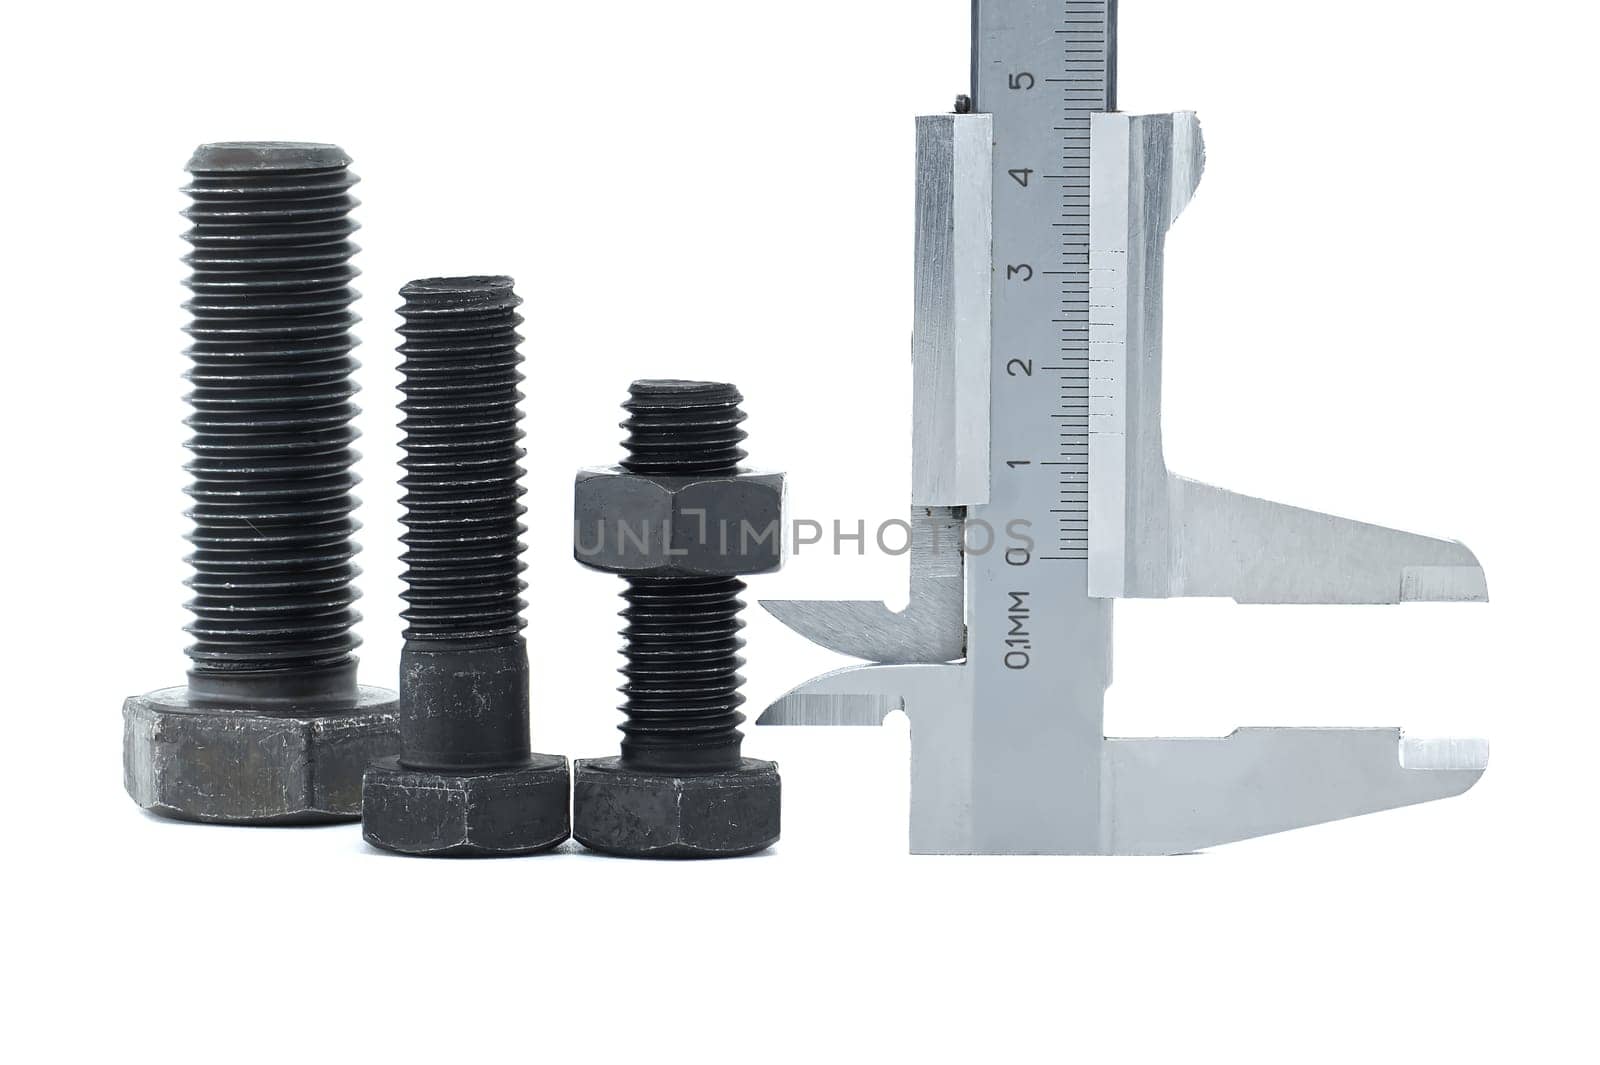 Caliper measure bolts with hexagonal heads on white by NetPix